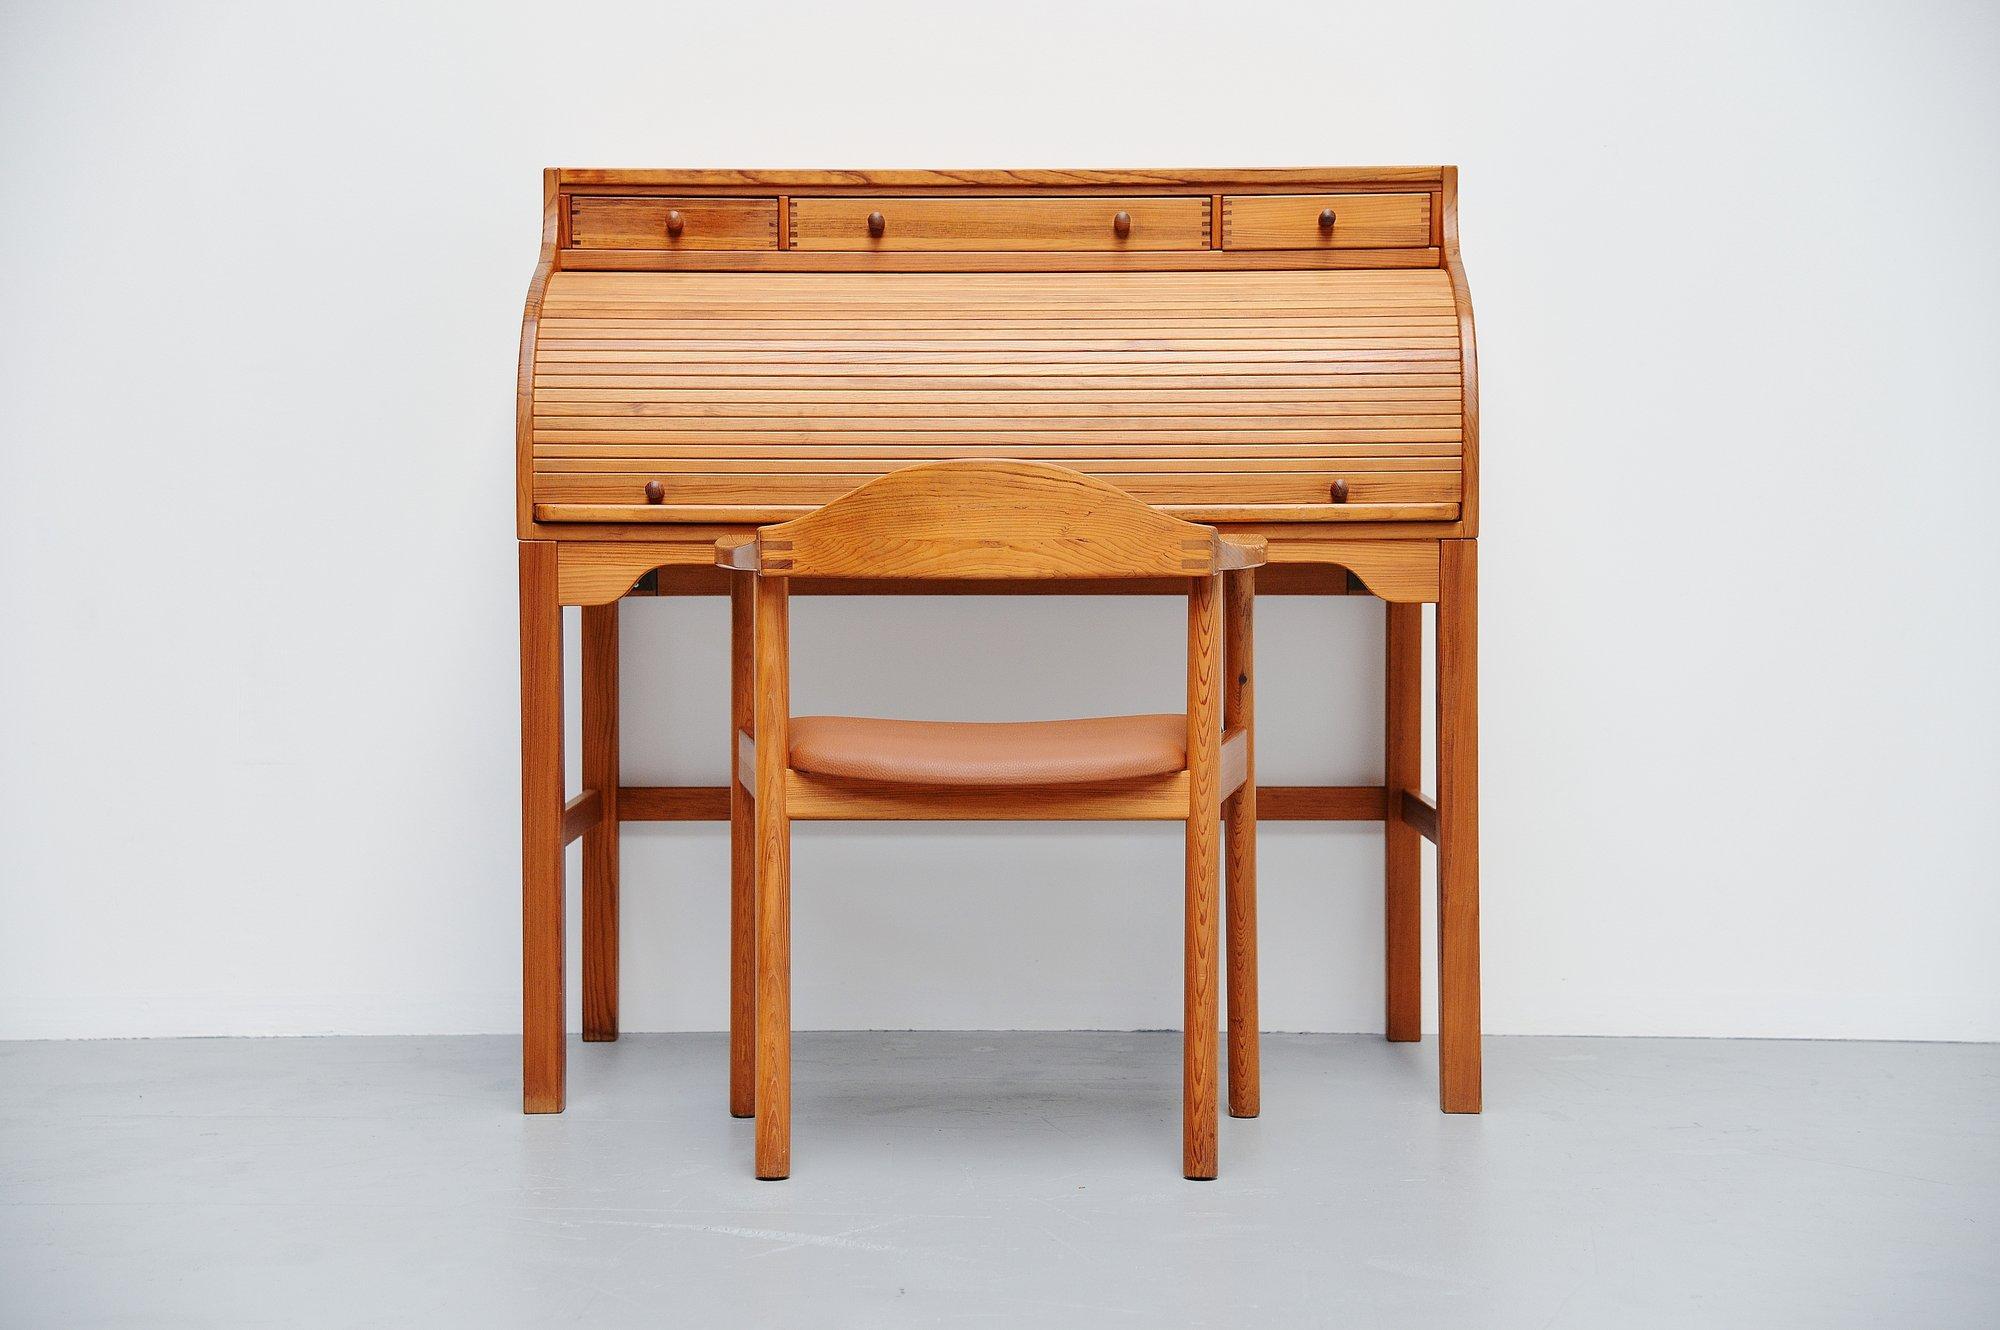 Very nice roll-top desk designed by Andreas Hansen and manufactured by Hadsten traeindustri, Denmark, 1970. This desk is made of solid pine wood and is complete with a matching desk chair. The desk has 3 drawers on top and a roll-top to close it and